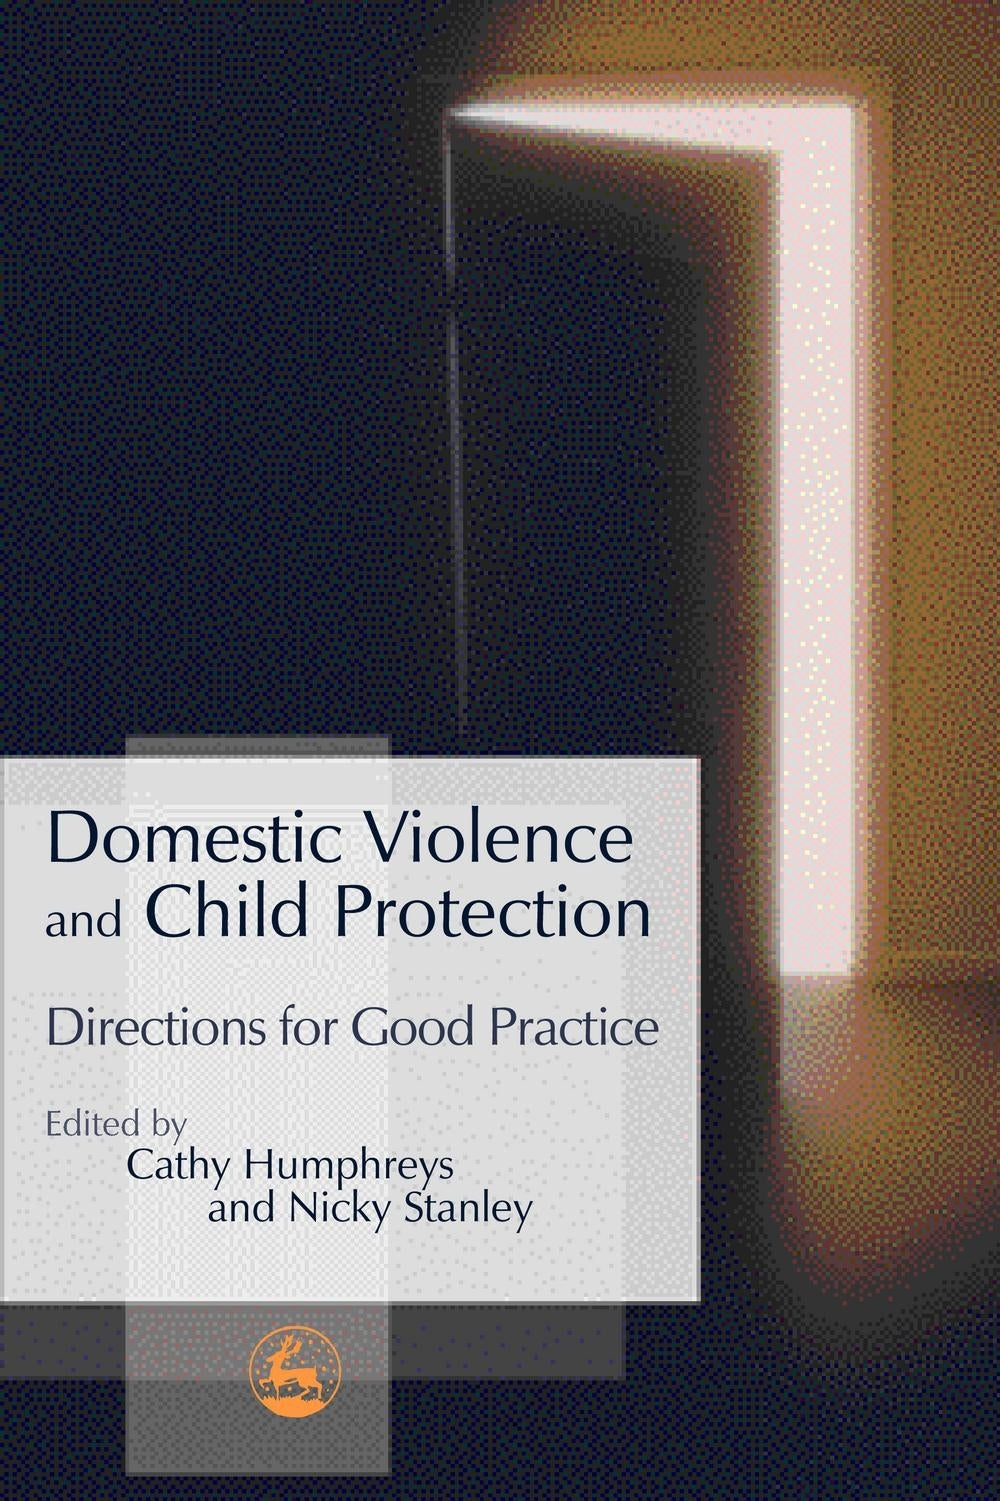 Domestic Violence and Child Protection by Nicky Stanley, Cathy Humphreys